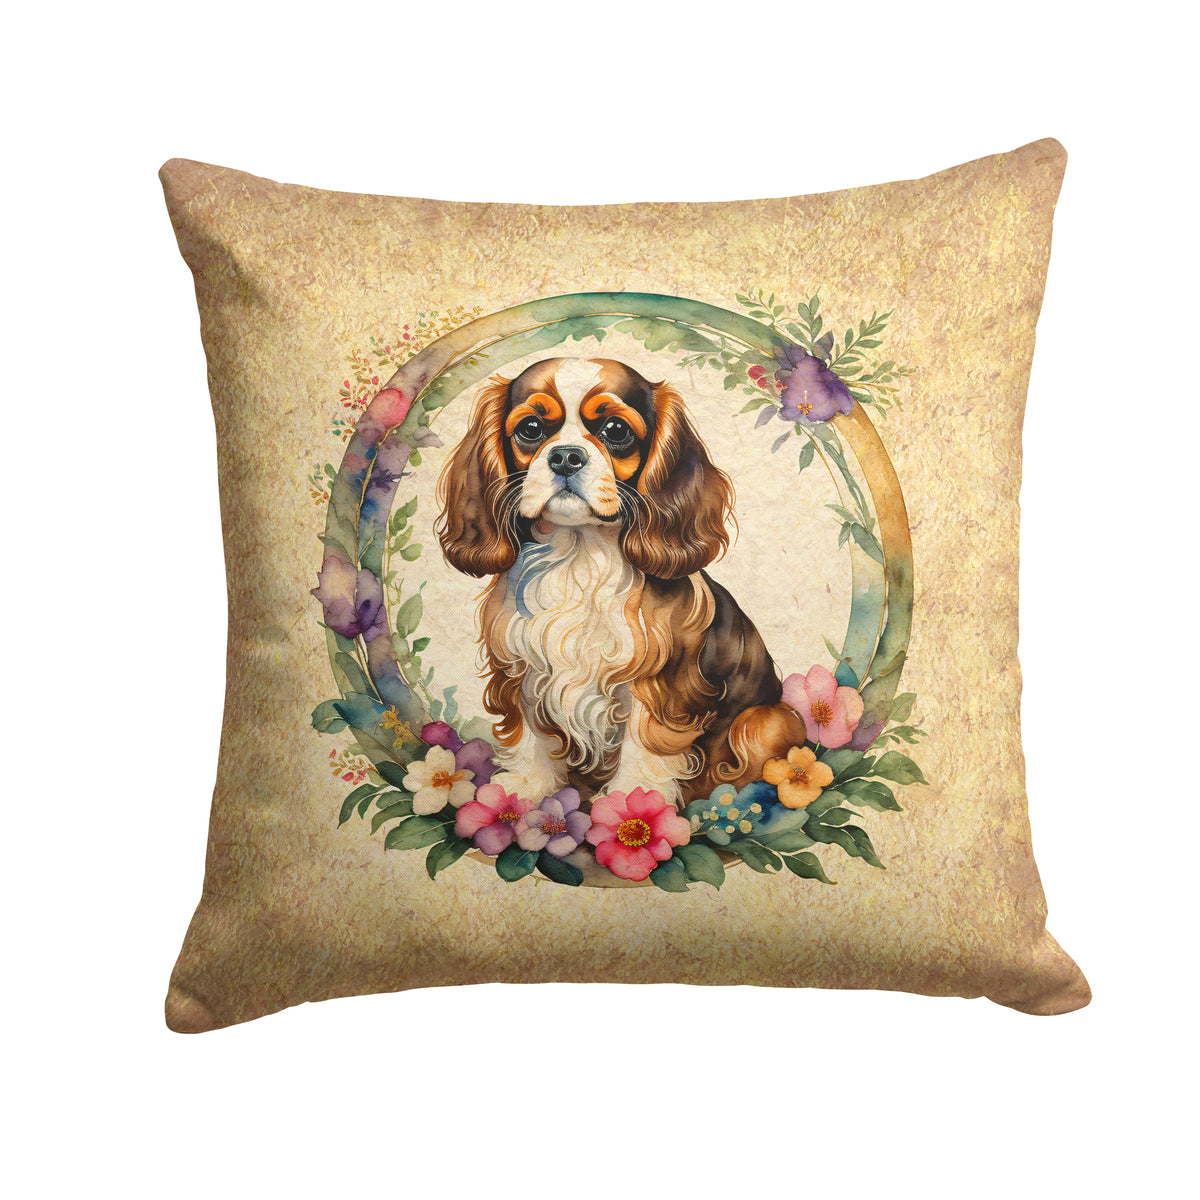 Buy this Cavalier Spaniel and Flowers Fabric Decorative Pillow